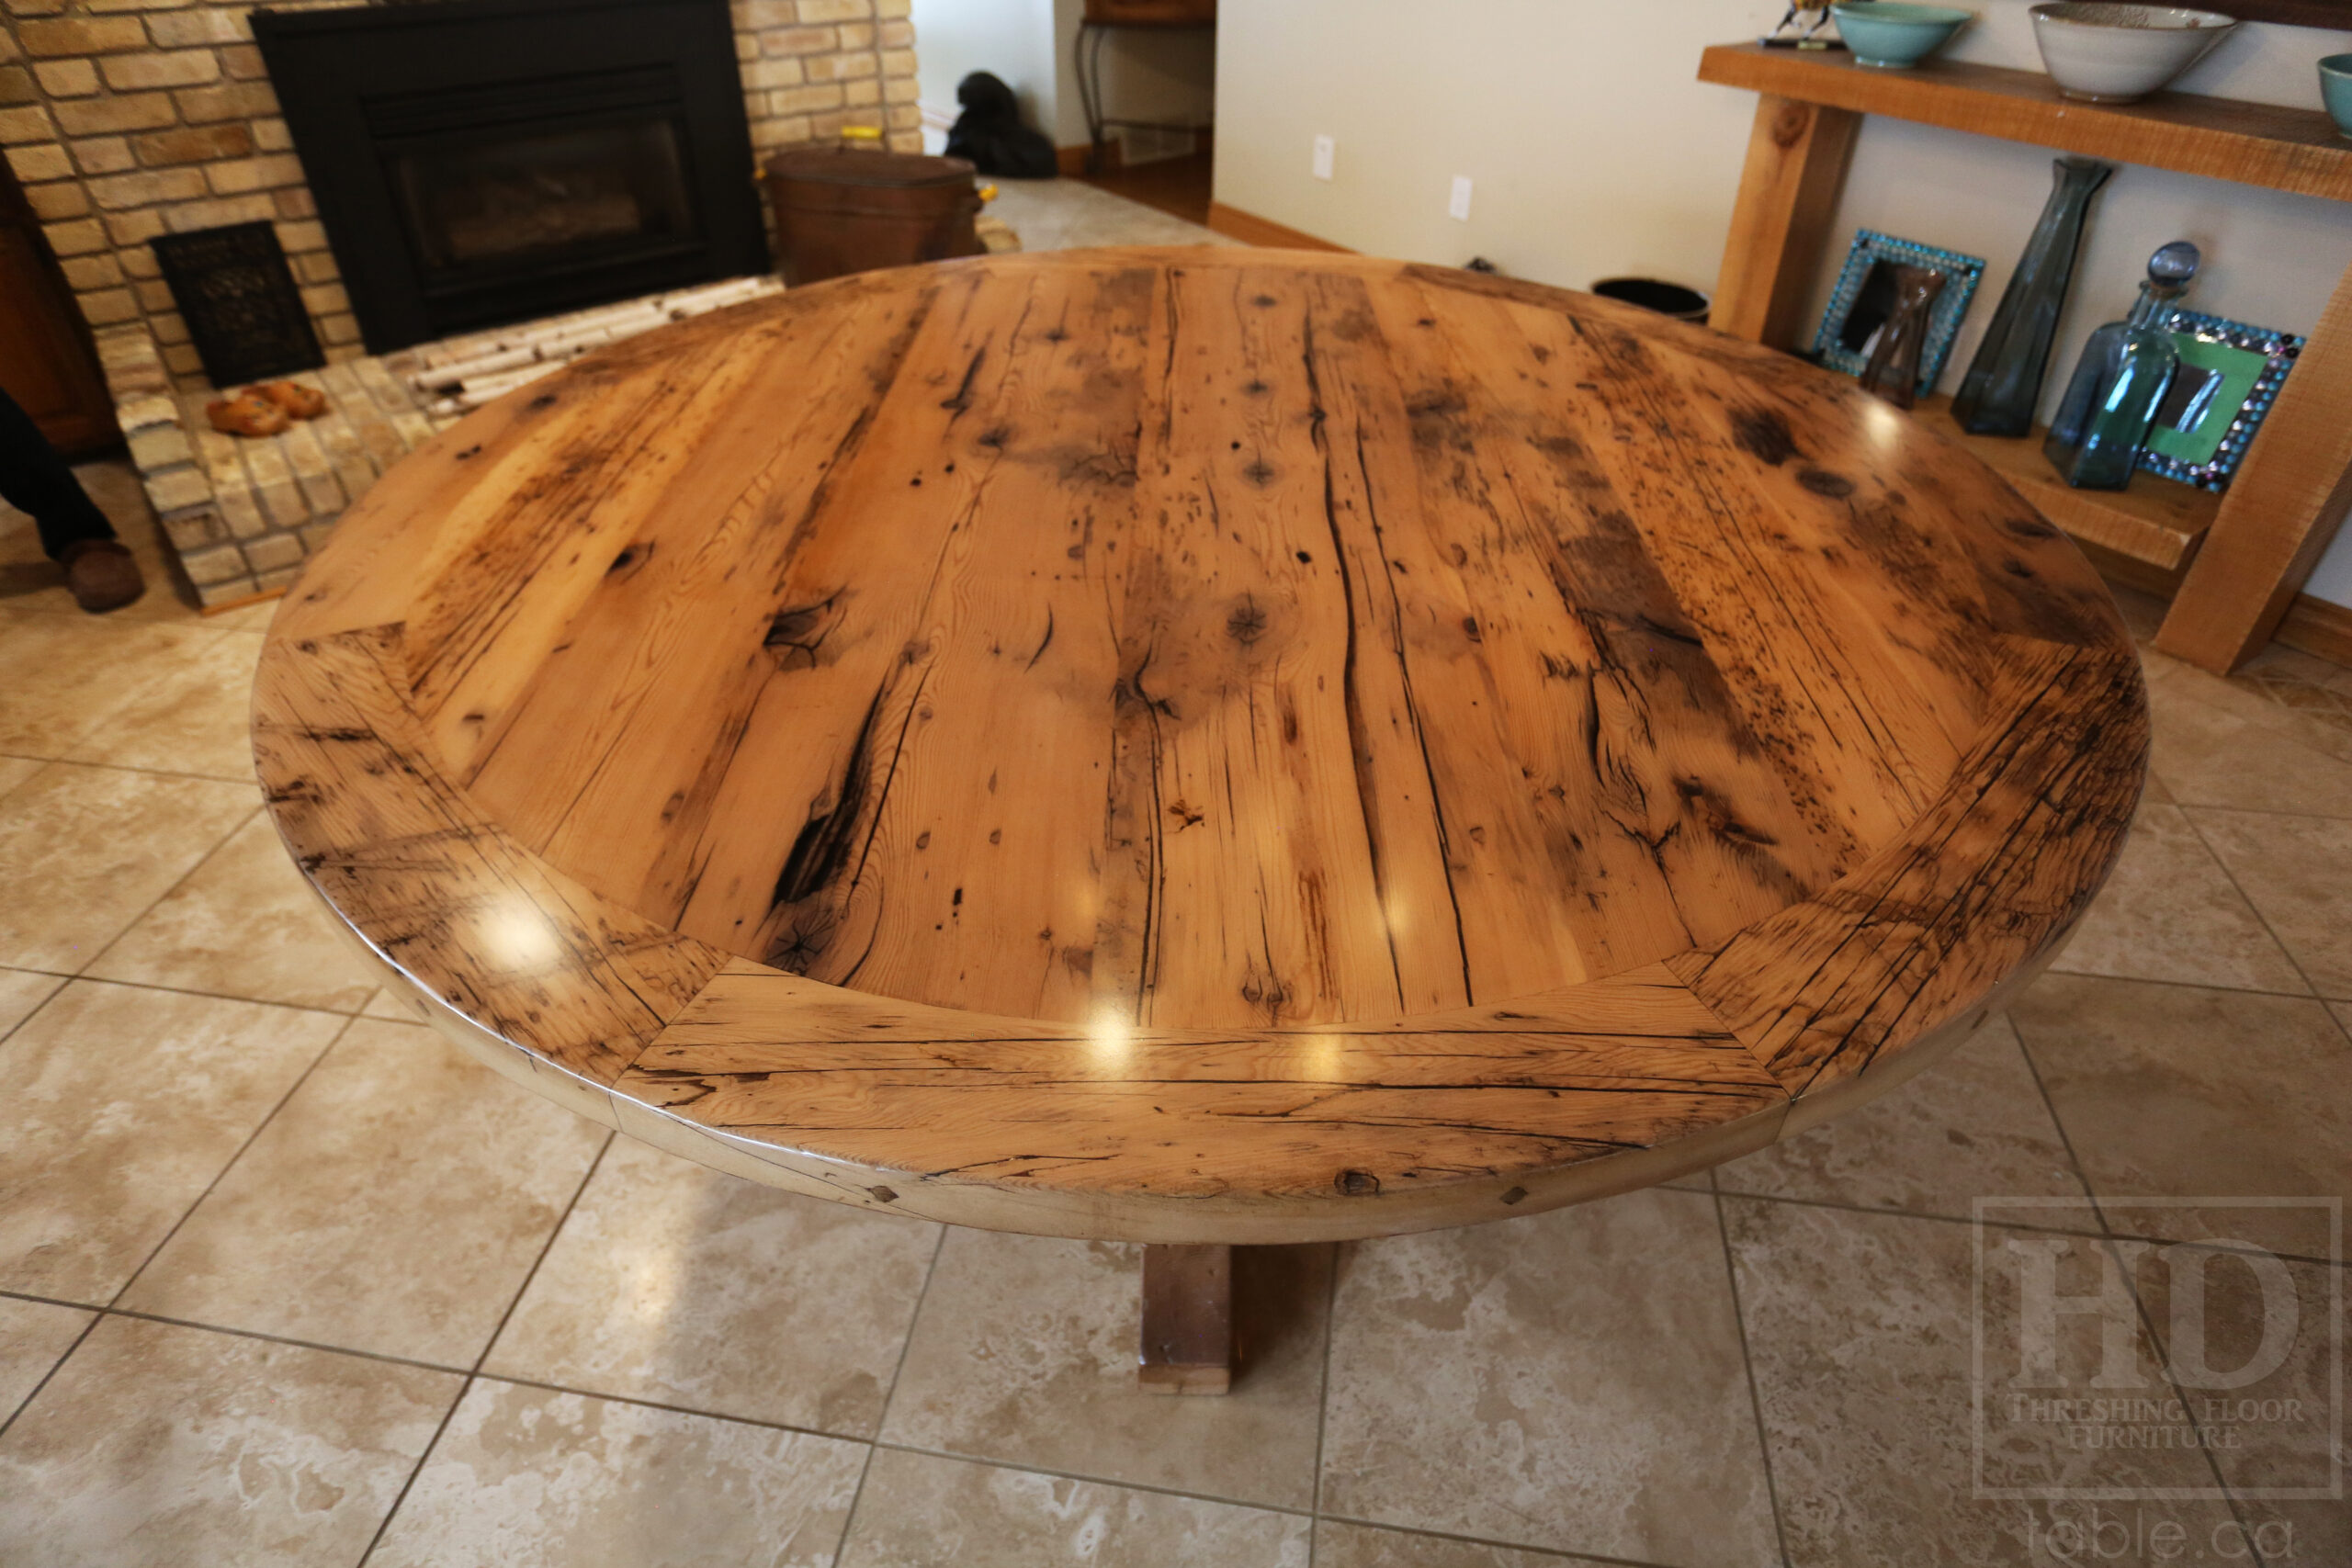 72” Reclaimed Ontario Barnwood Round Table we made for a Lakeside, Ontario home – Hand-Hewn Beam Post Base - Old Growth Hemlock Threshing Floor Construction - Original edges & distressing maintained – Bread Edge Boards –Premium epoxy + satin polyurethane finish – Greytone Option - www.table.ca